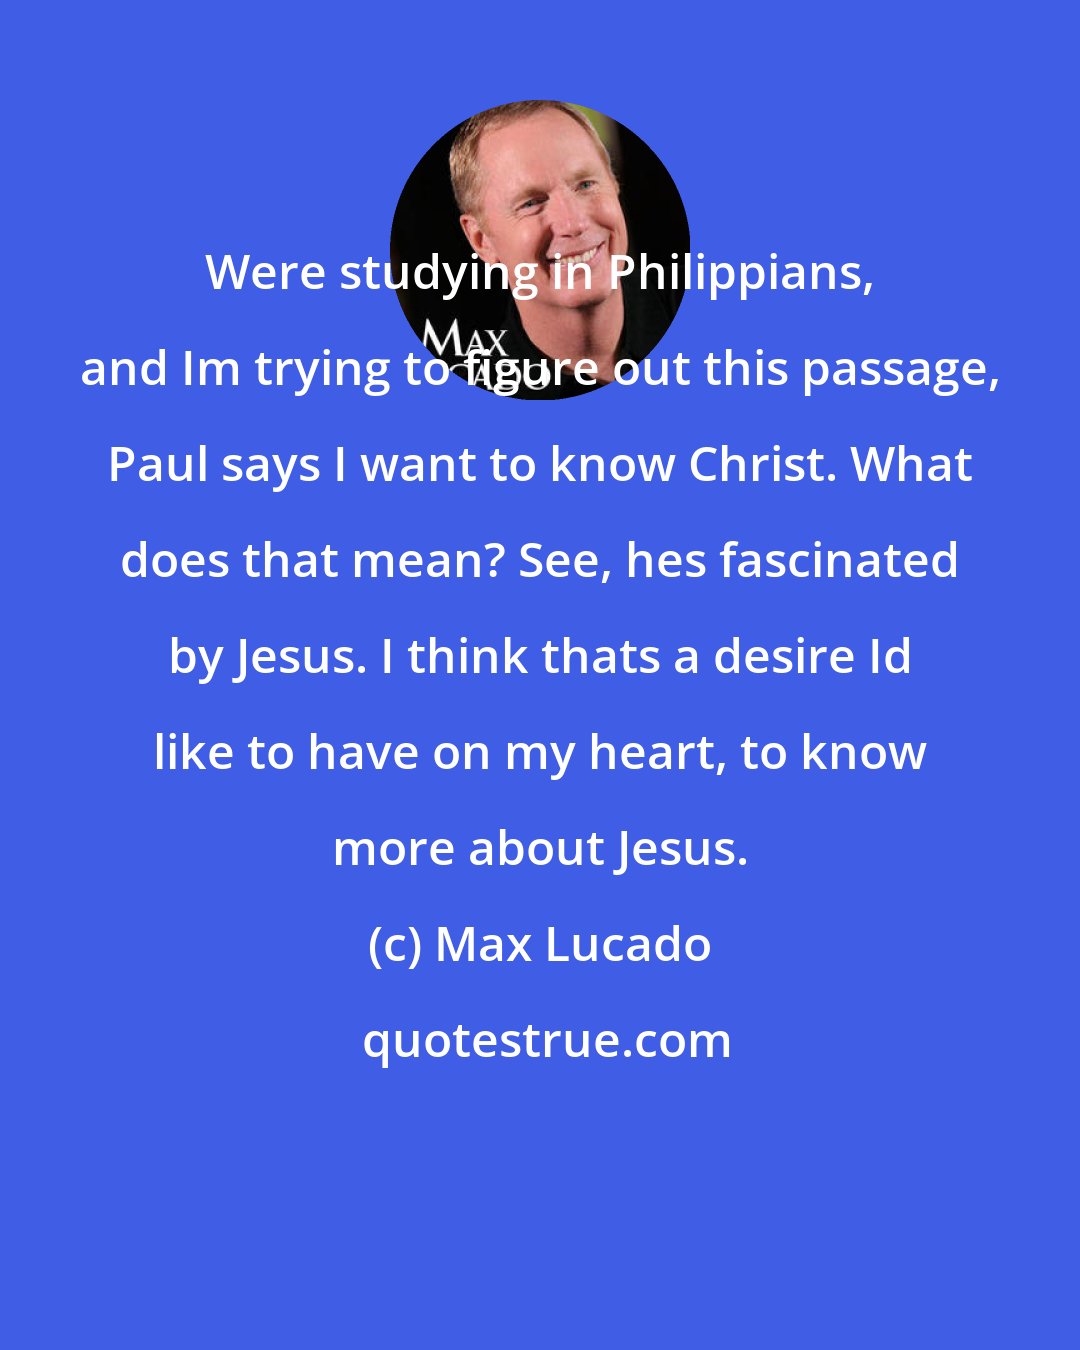 Max Lucado: Were studying in Philippians, and Im trying to figure out this passage, Paul says I want to know Christ. What does that mean? See, hes fascinated by Jesus. I think thats a desire Id like to have on my heart, to know more about Jesus.